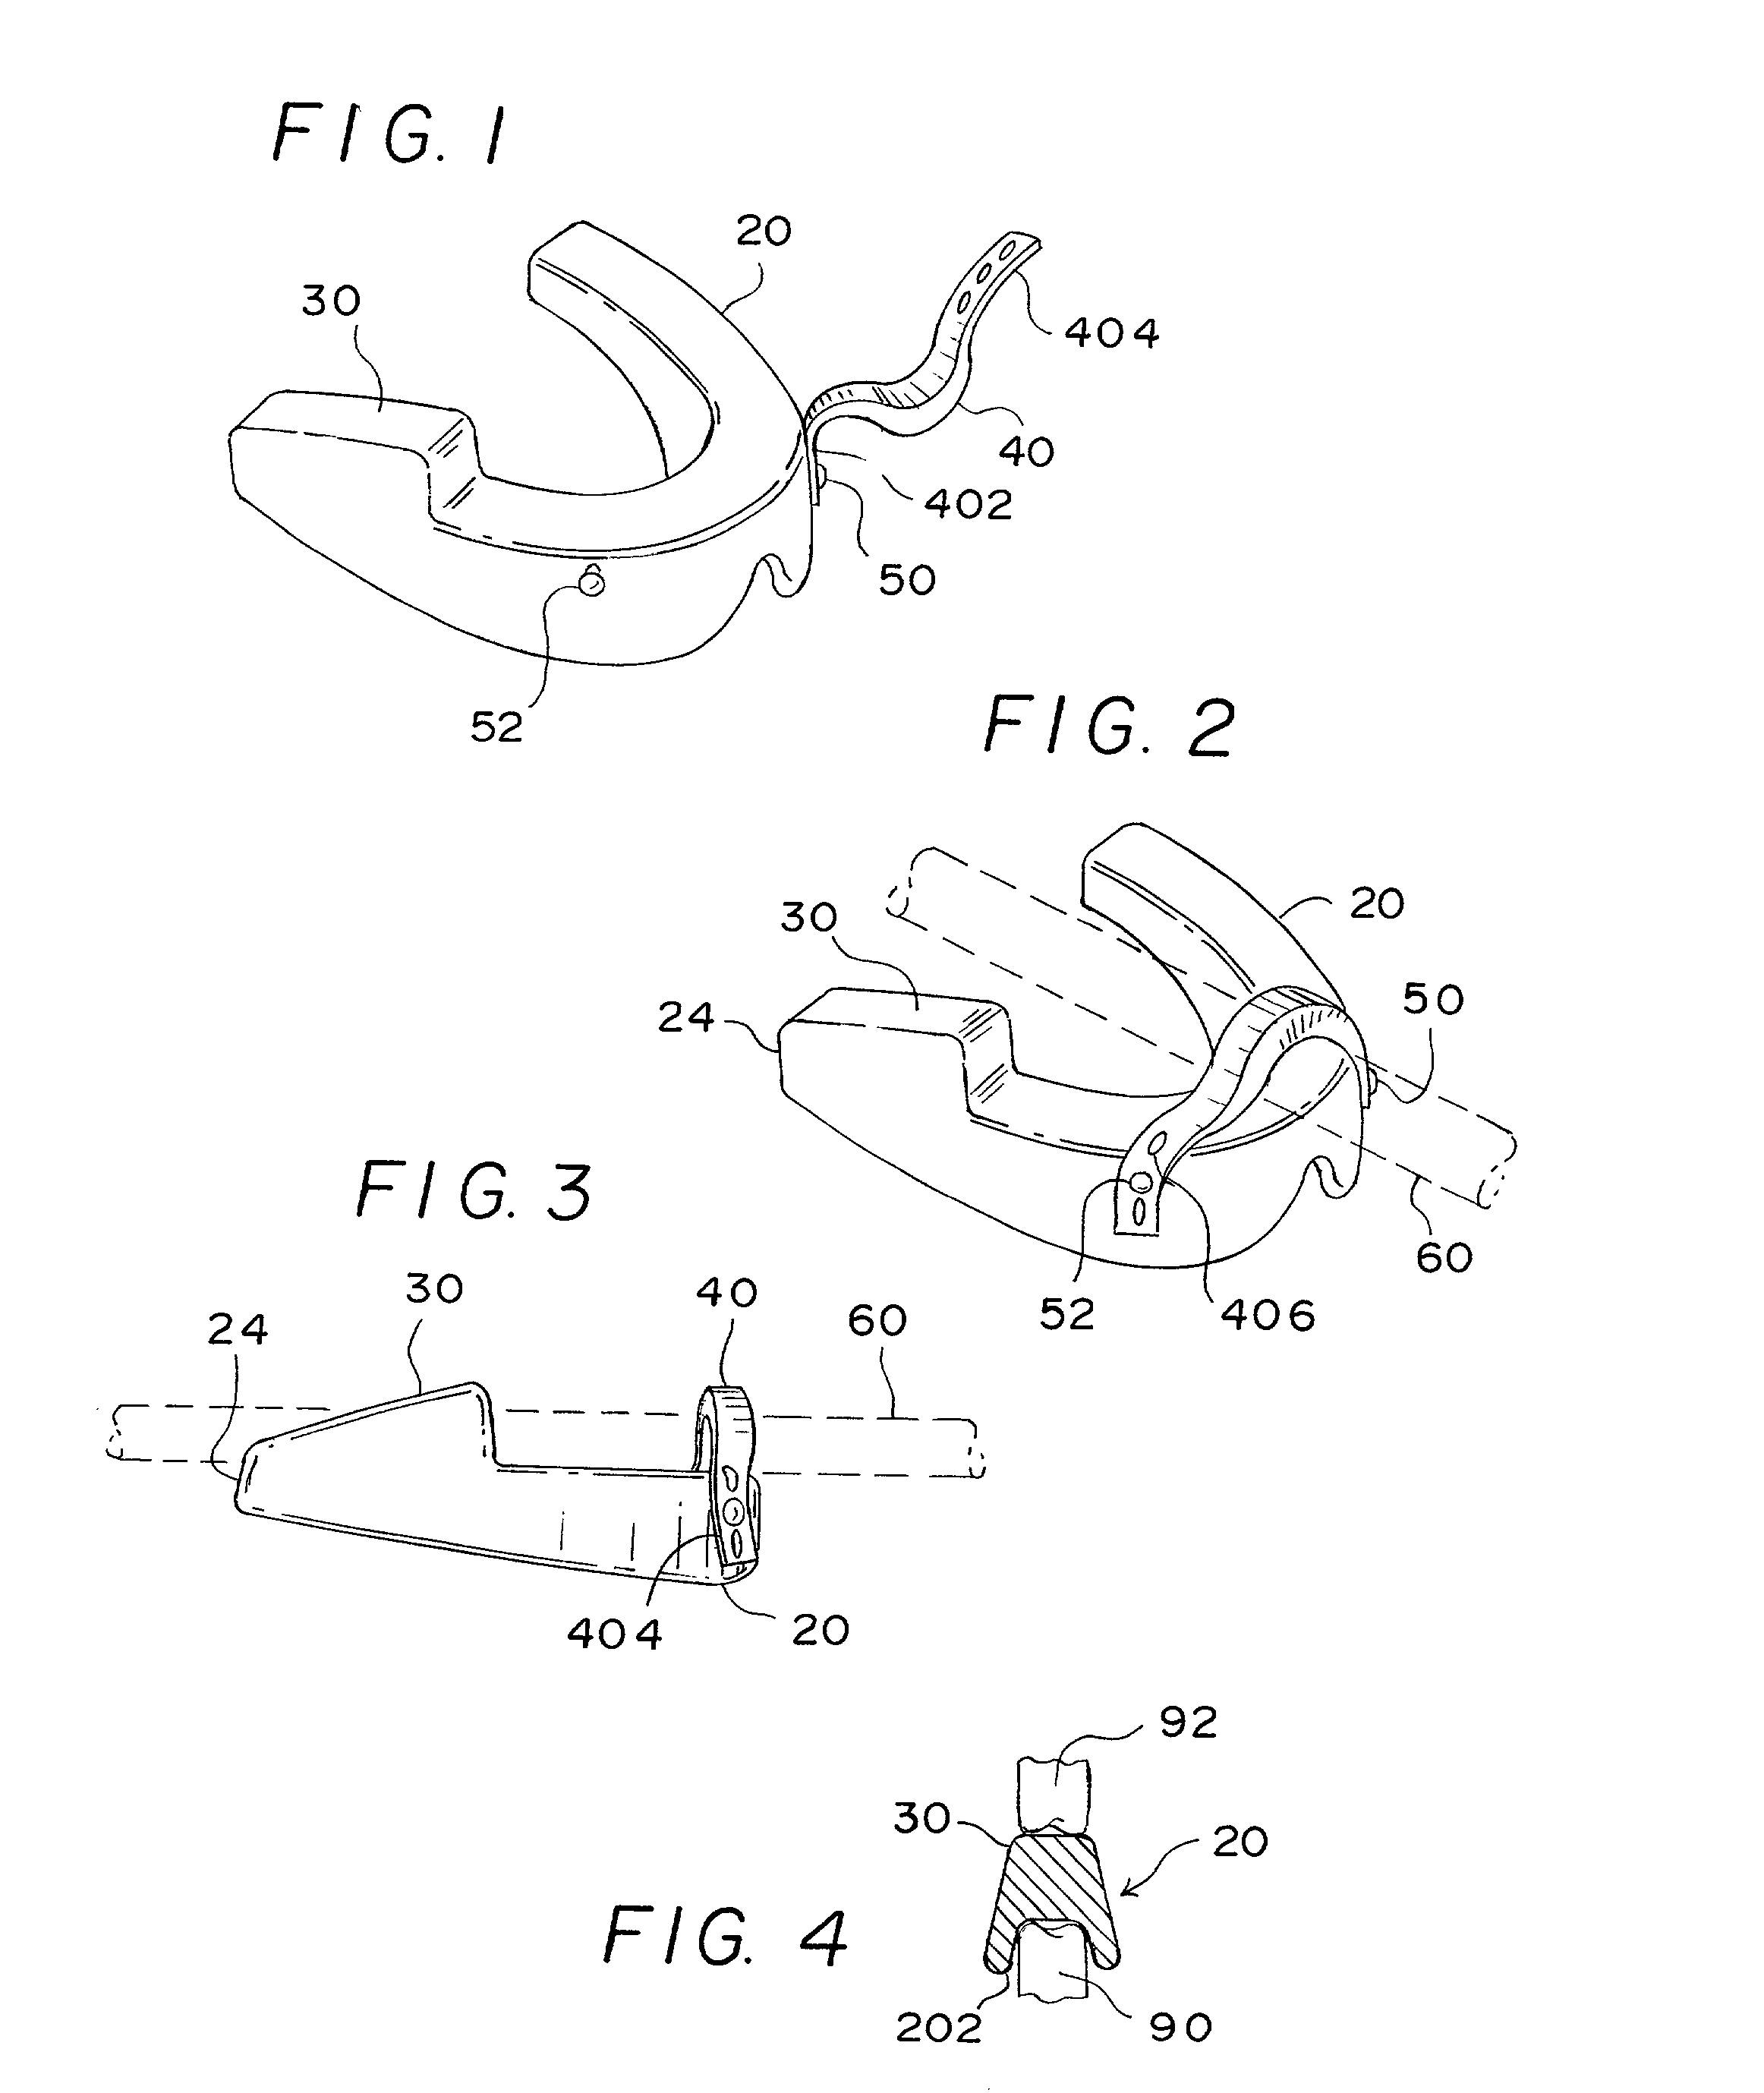 Catheter securing device